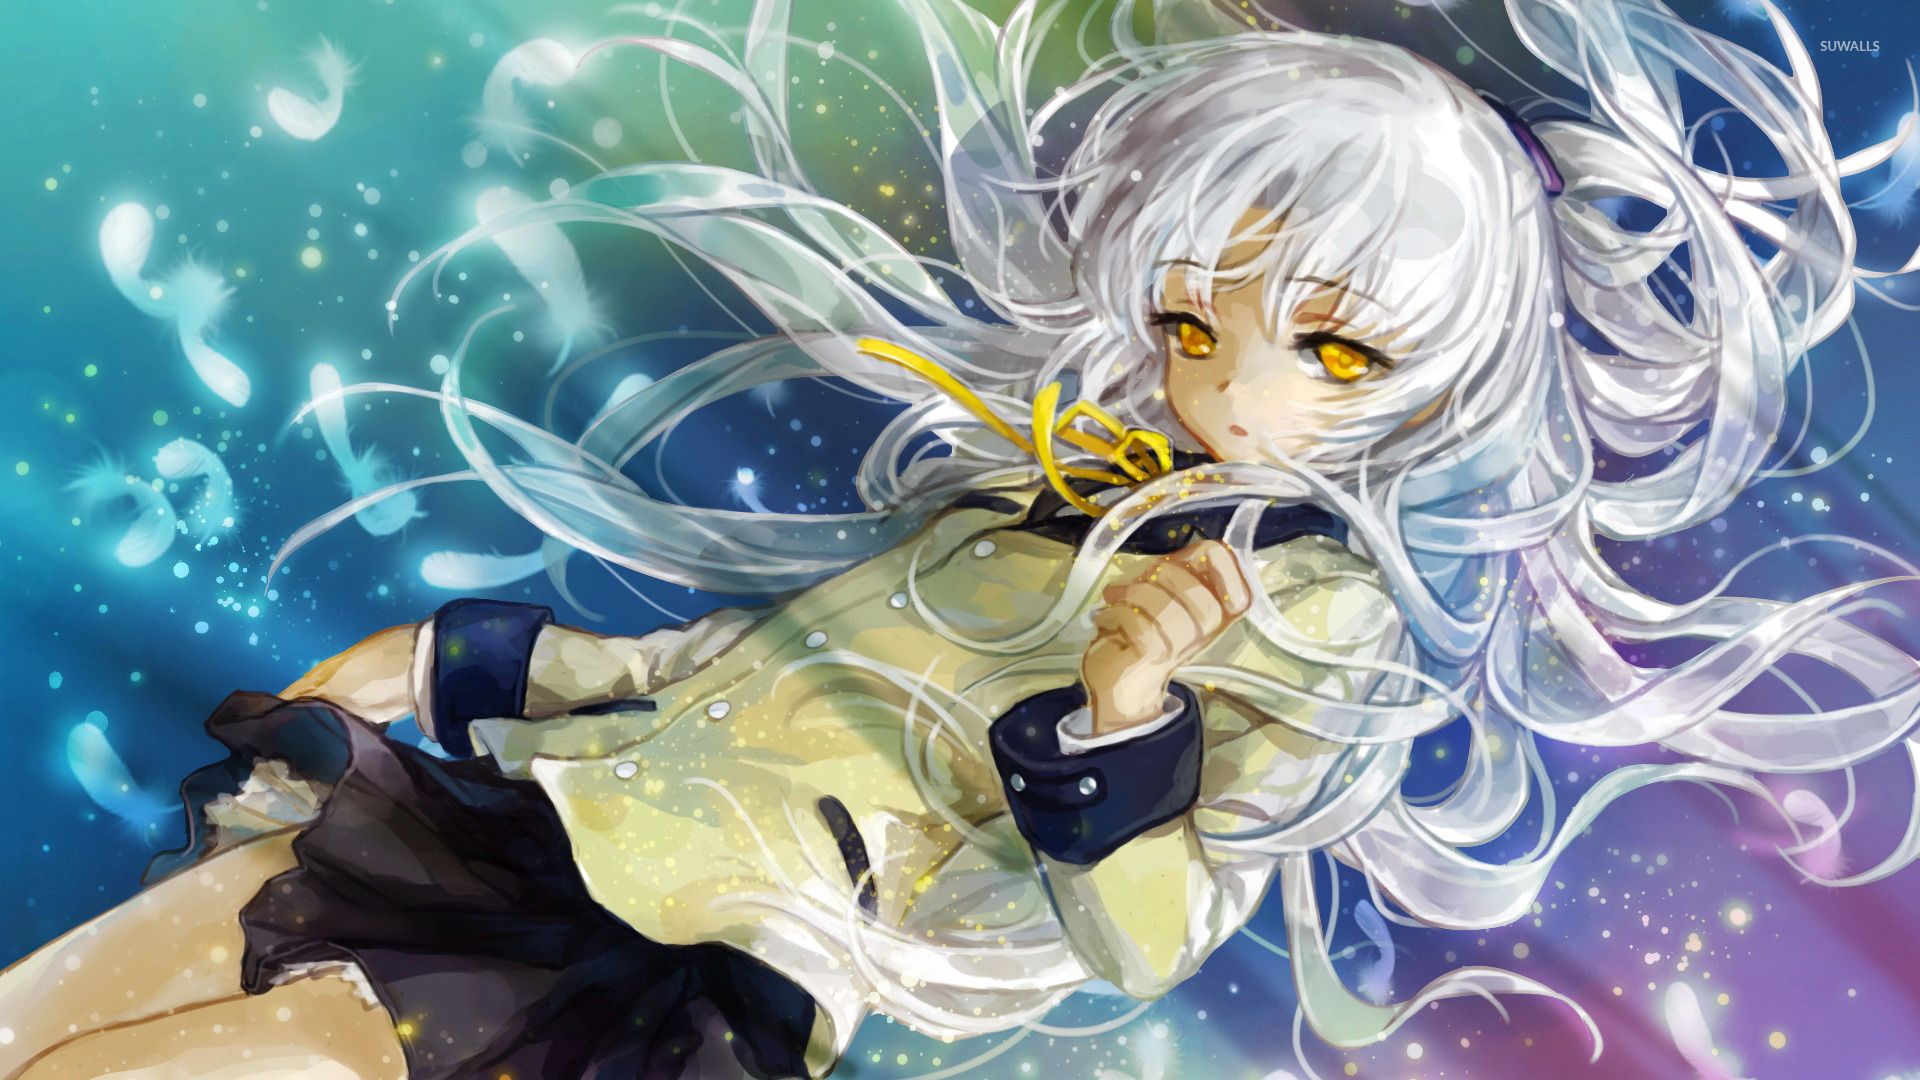 Schoolgirl with white hair wallpapers